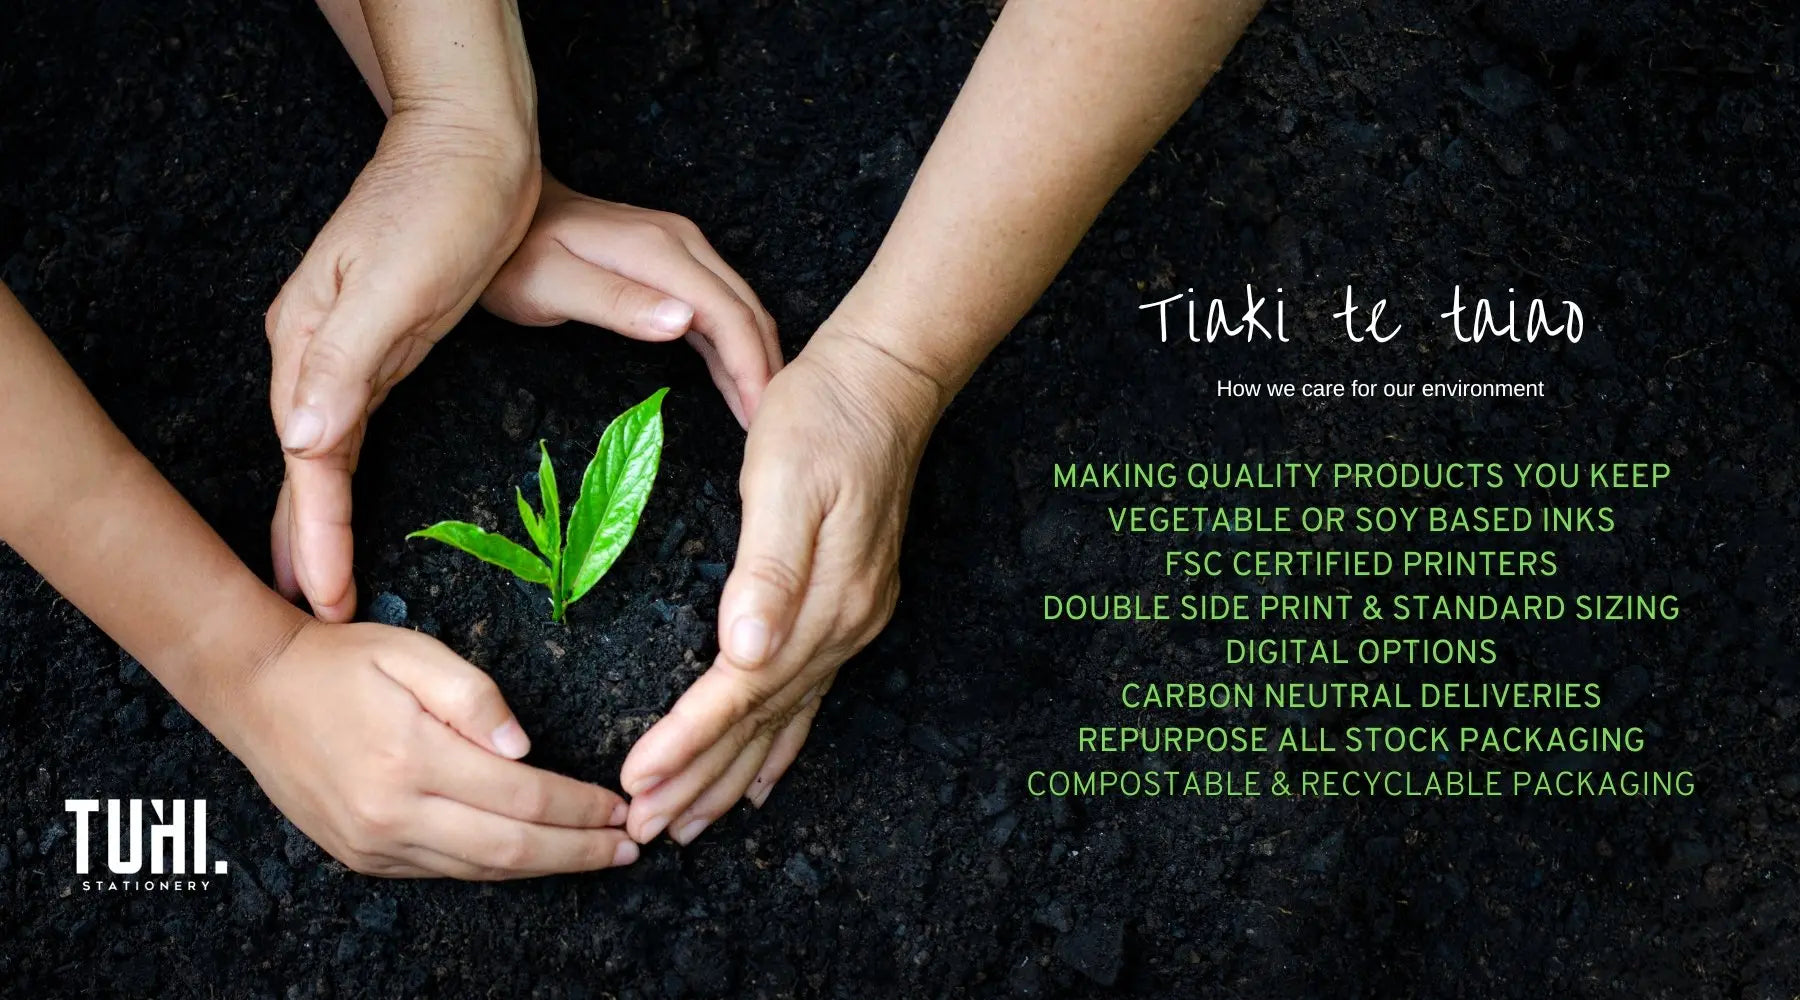 What-We-Do-to-Reduce-Our-Impact-on-the-Taiao-Environment Tuhi Stationery Ltd